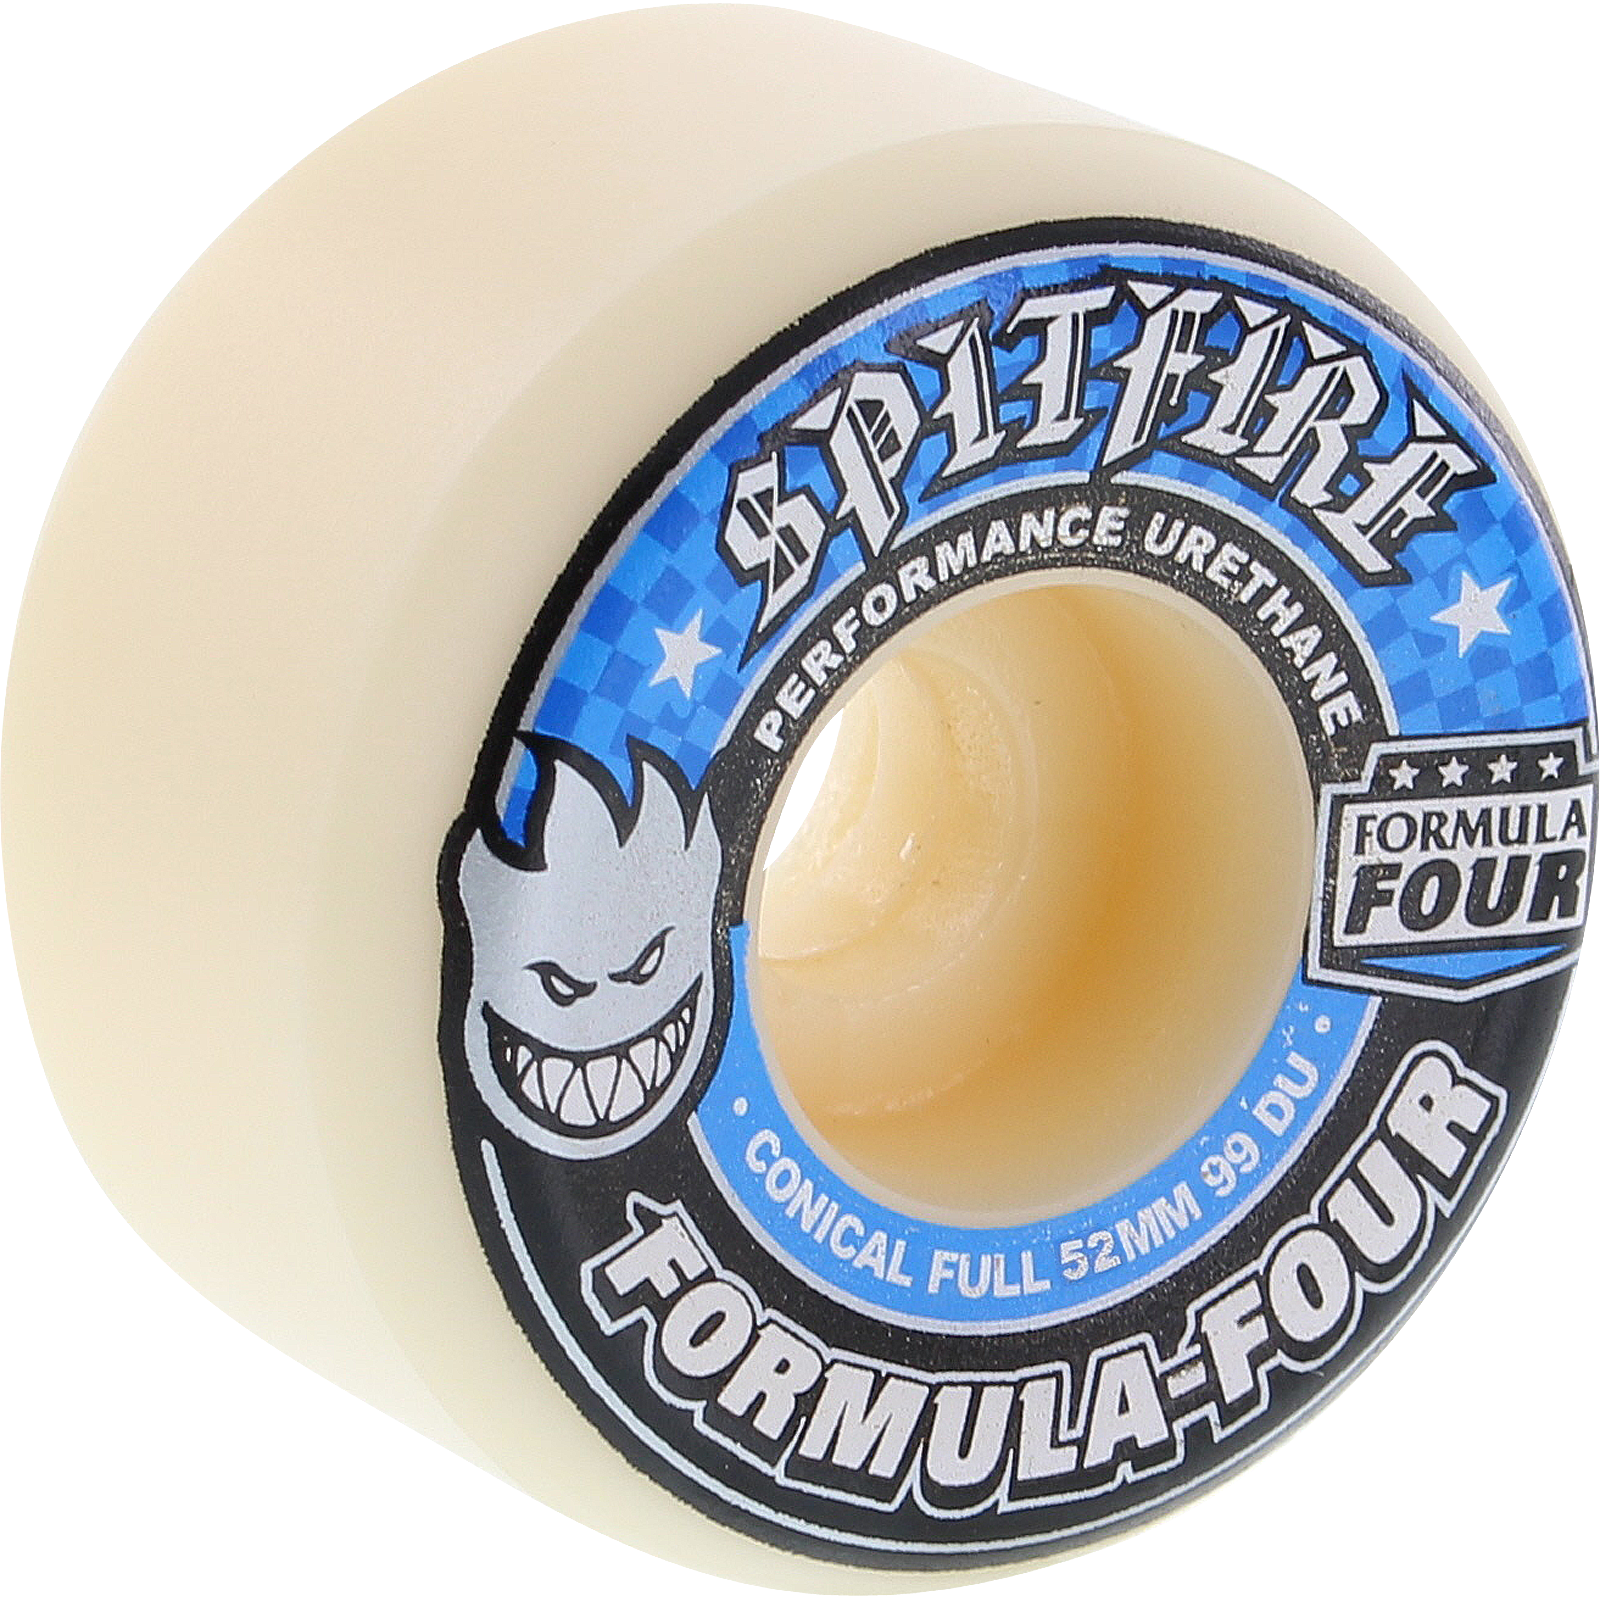 Spitfire F4 99a Conical Full 52mm White W/Blue Skateboard Wheels (Set of 4)